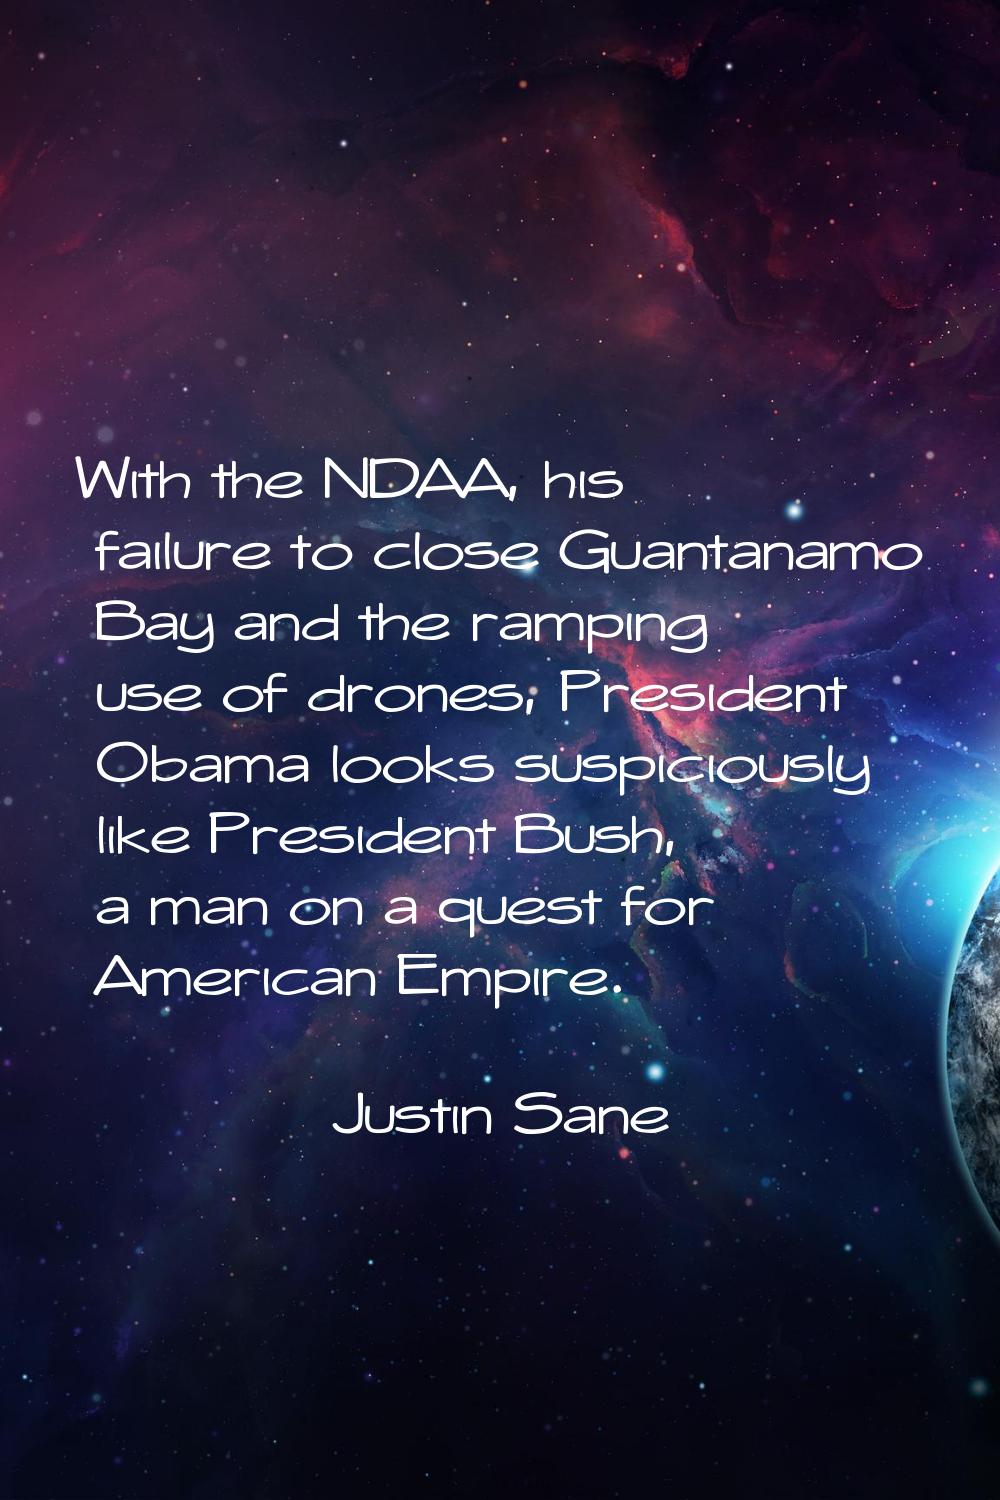 With the NDAA, his failure to close Guantanamo Bay and the ramping use of drones, President Obama l